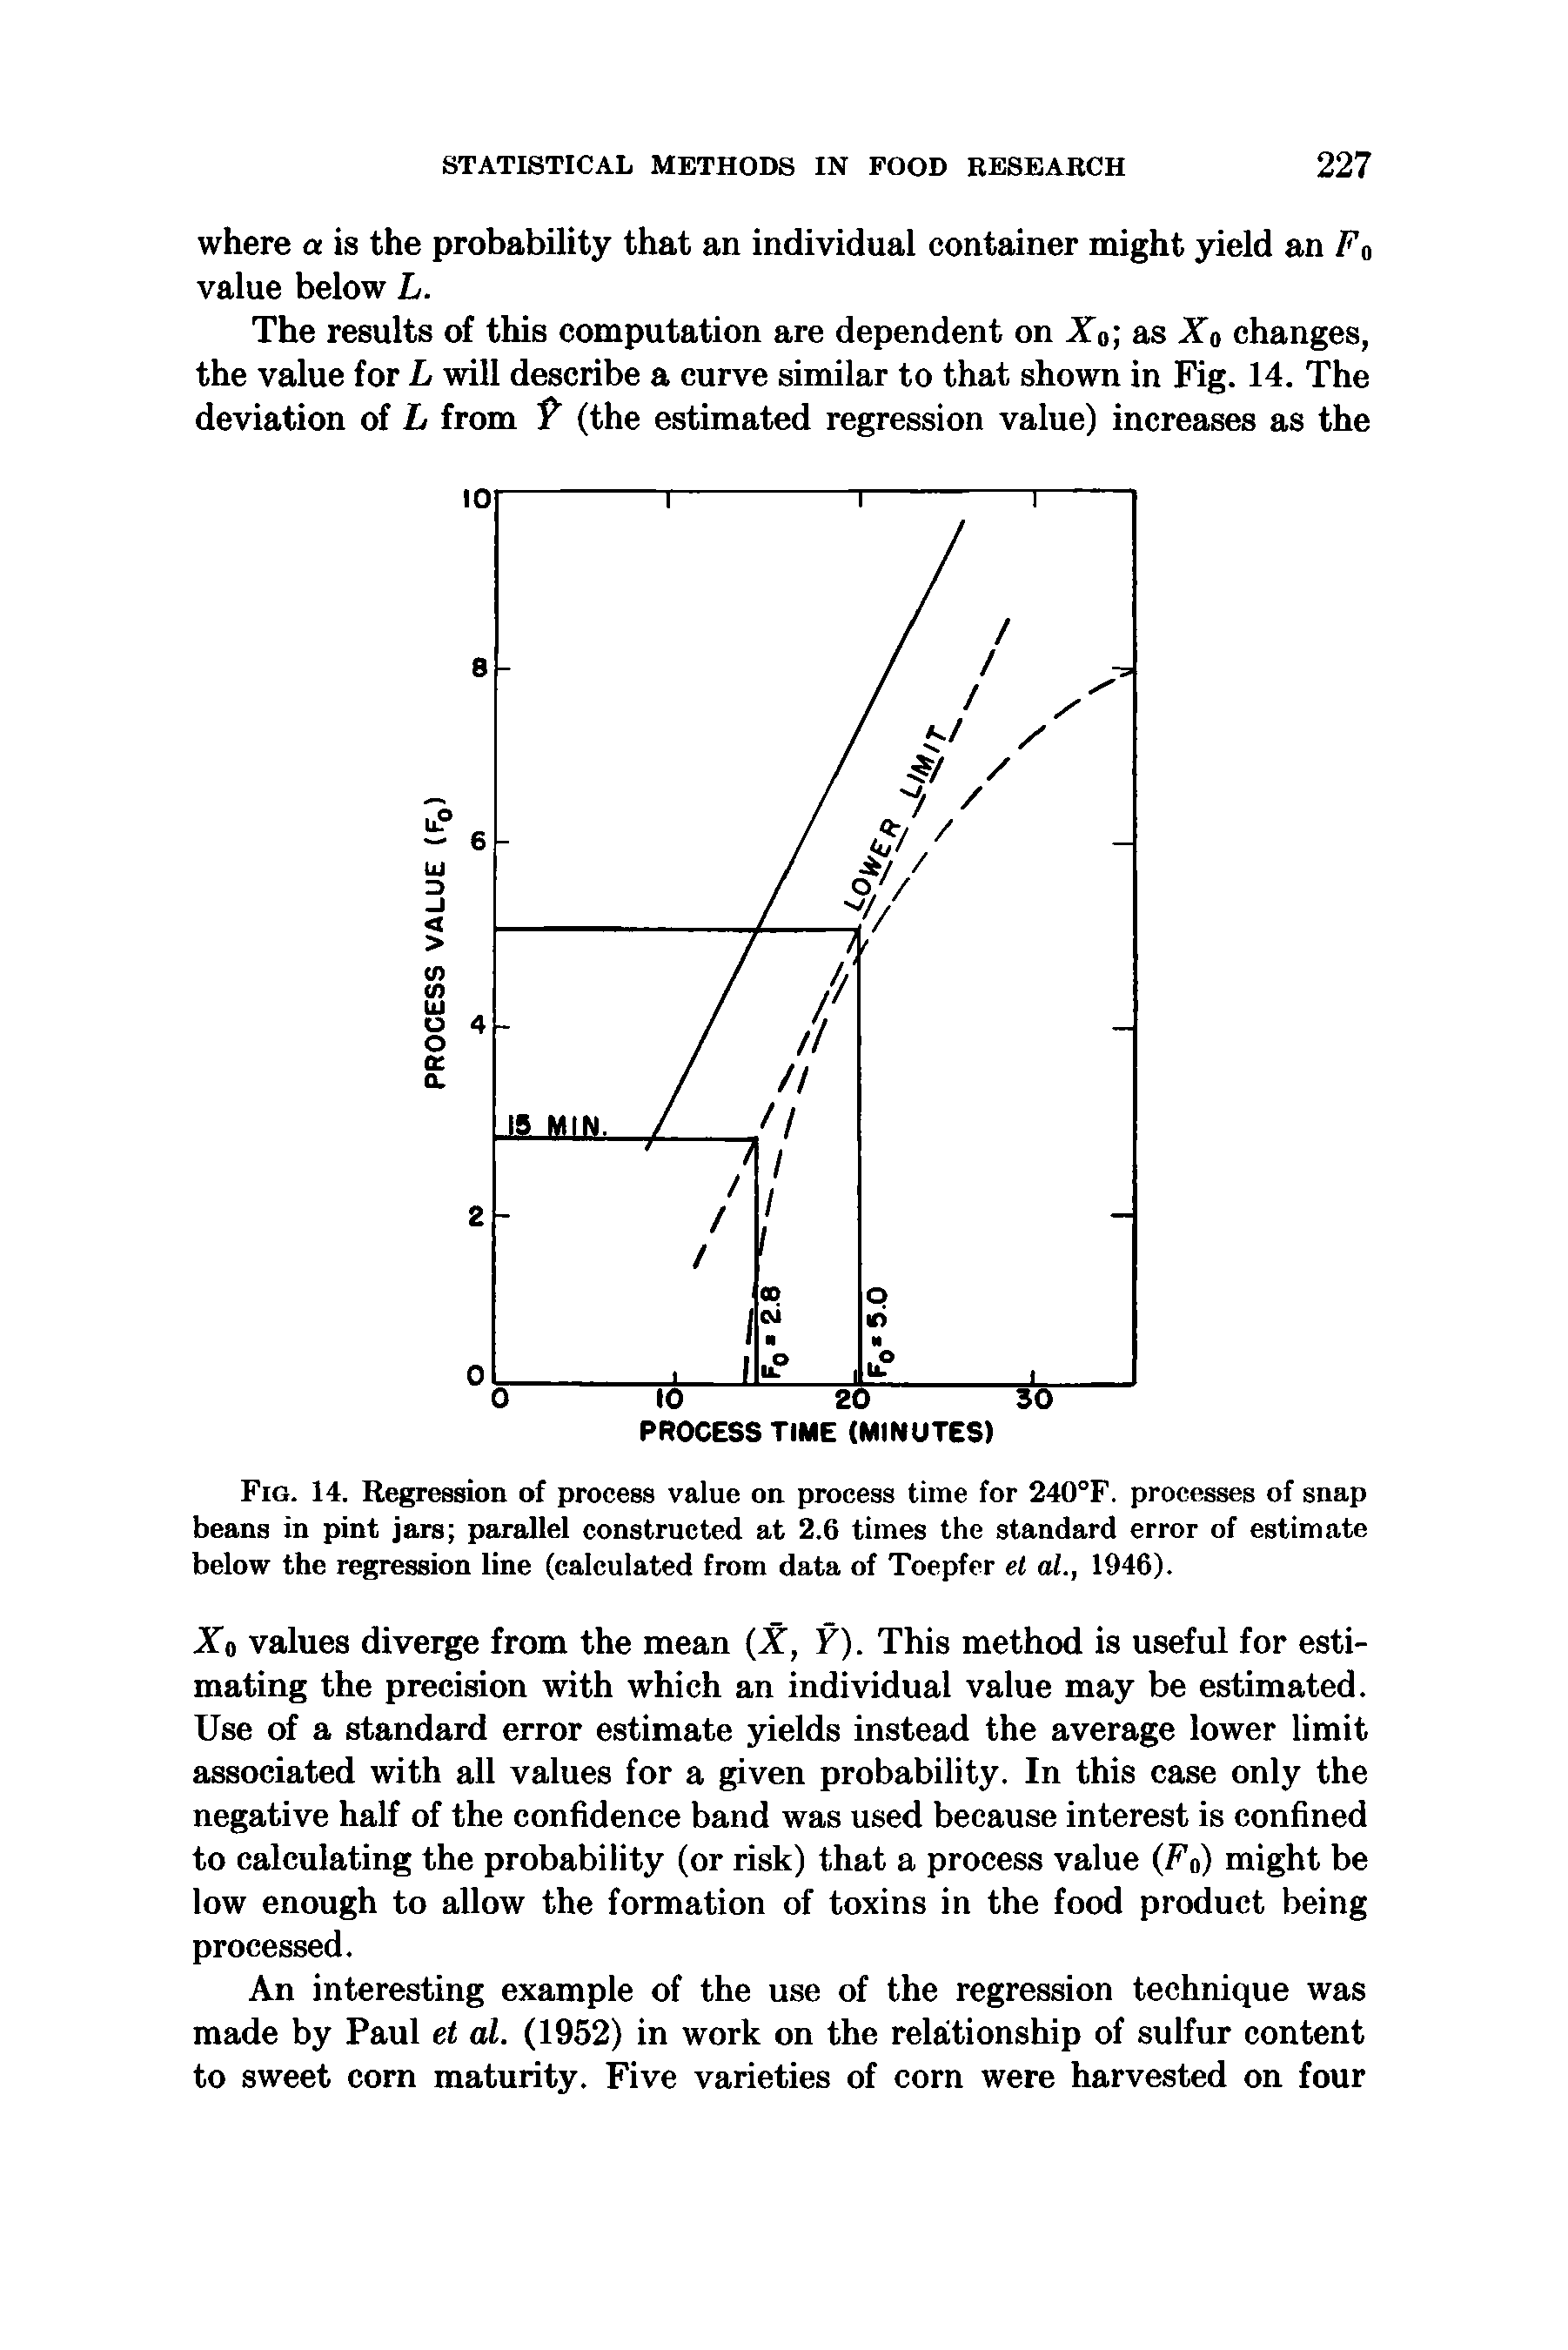 Fig. 14. Regression of process value on process time for 240°F. processes of snap beans in pint jars parallel constructed at 2.6 times the standard error of estimate below the regression line (calculated from data of Toepfer el al., 1946).